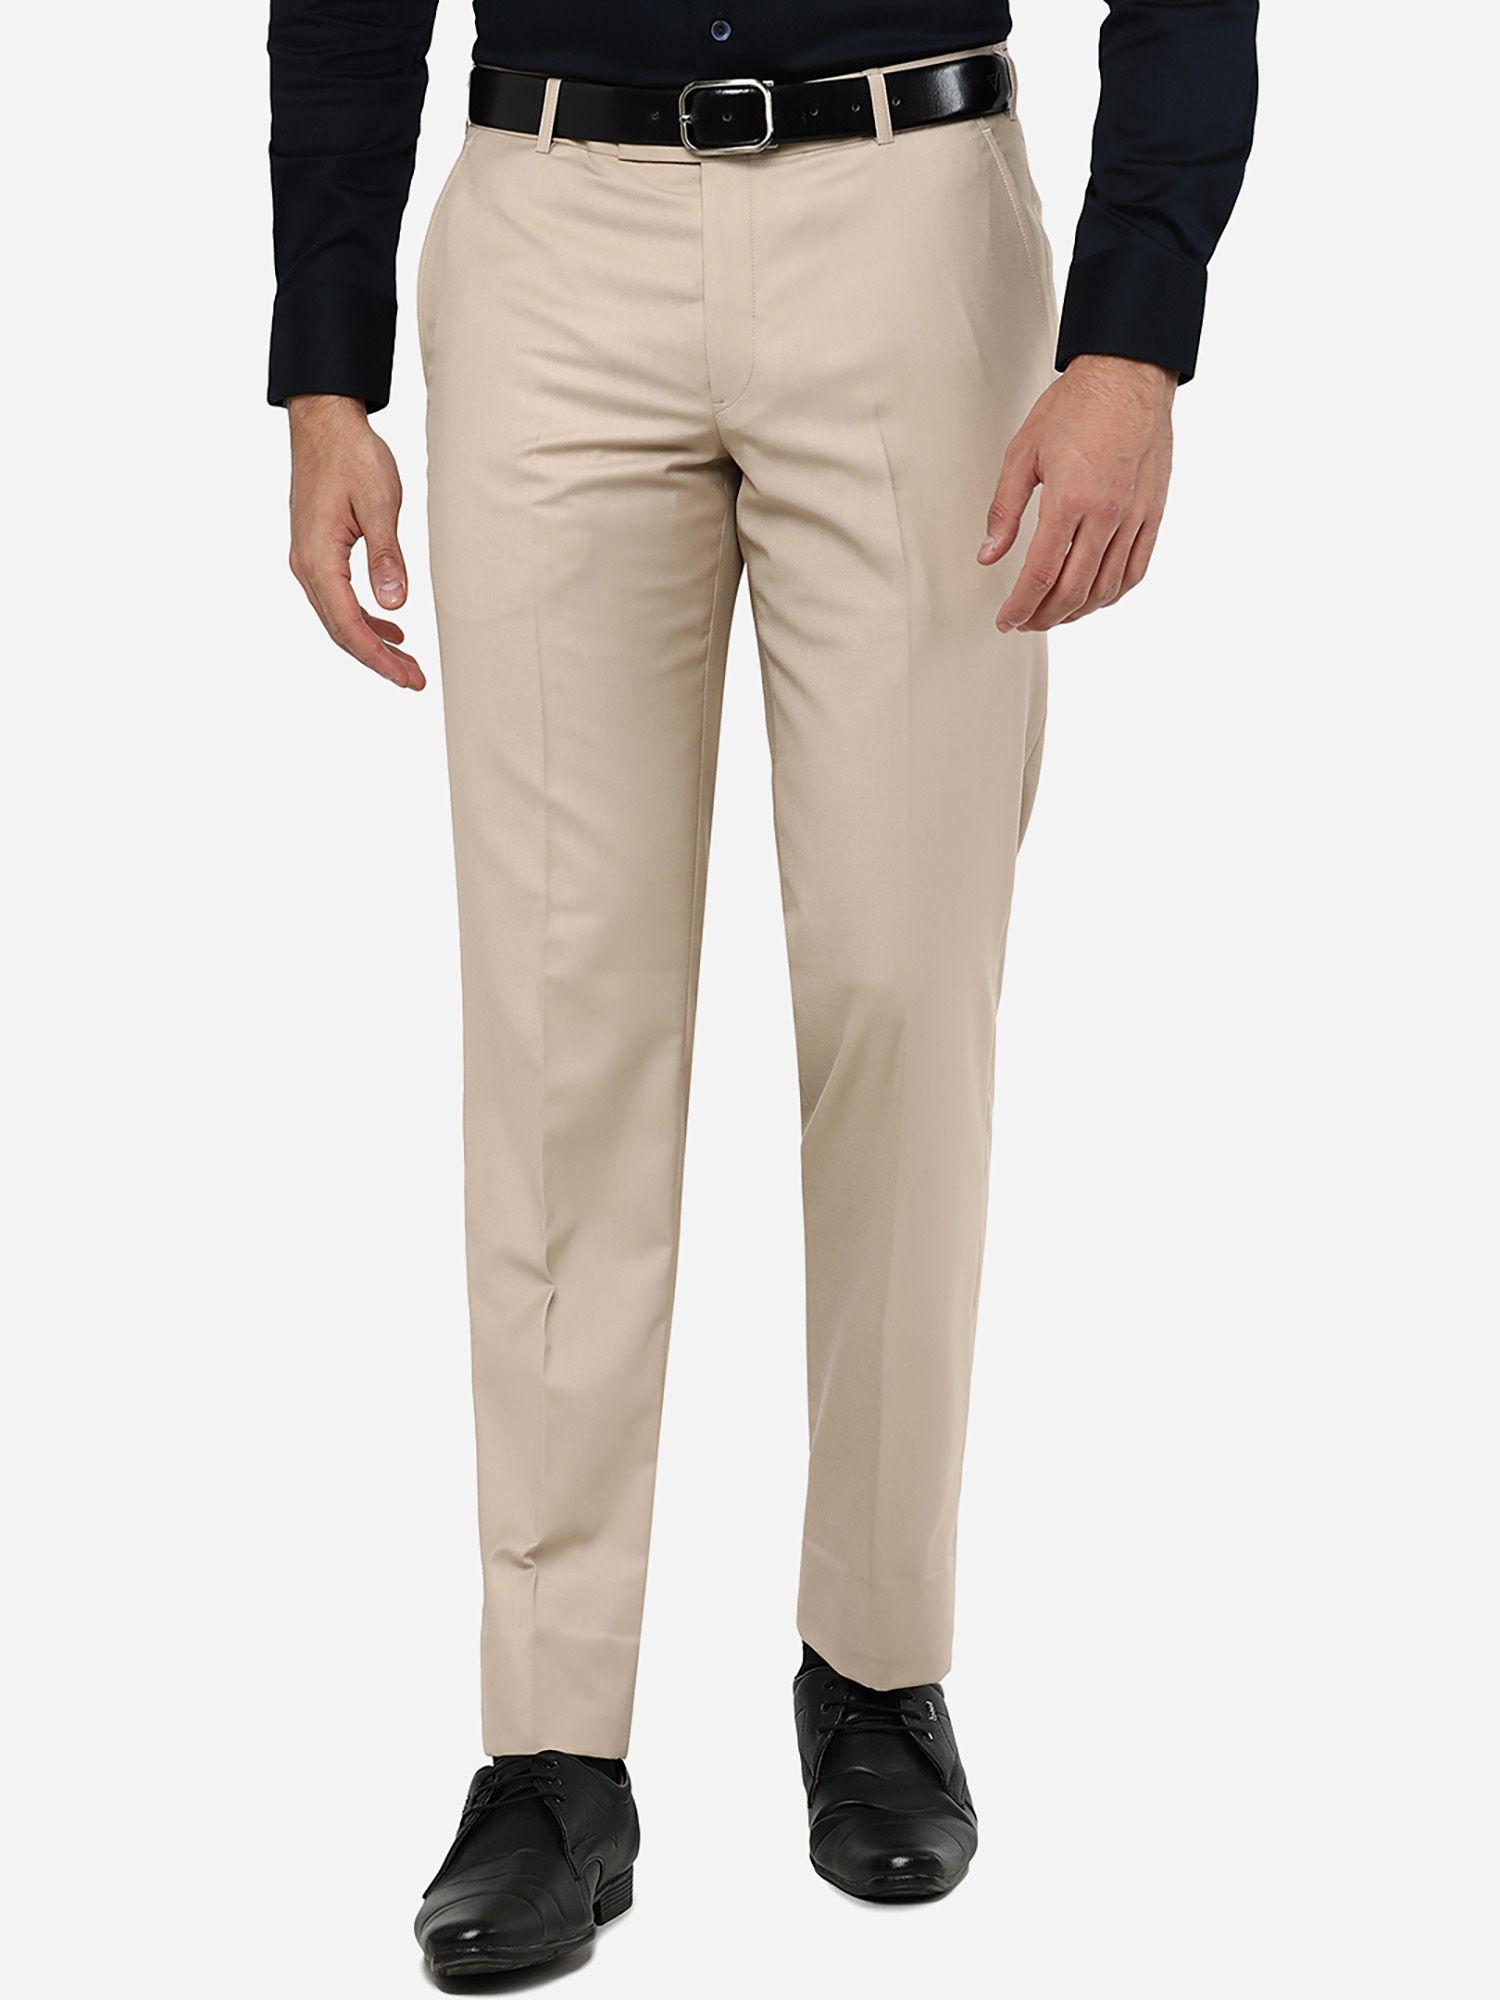 men's solid beige terry rayon slim fit formal trouser